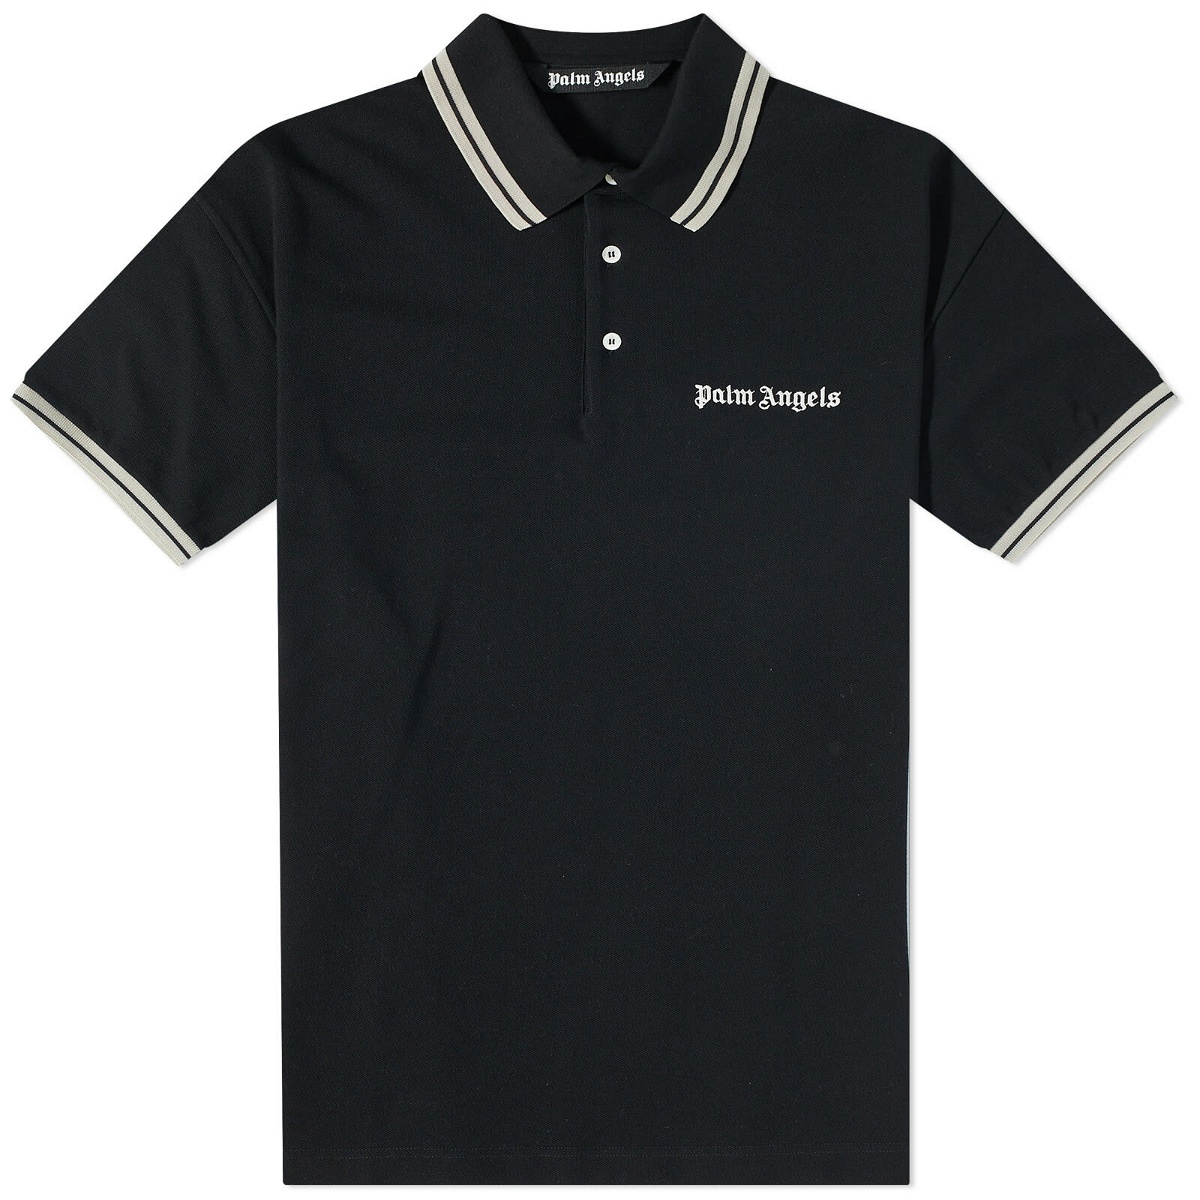 Palm Angels Men's Classic Polo Shirt in Black/White Palm Angels